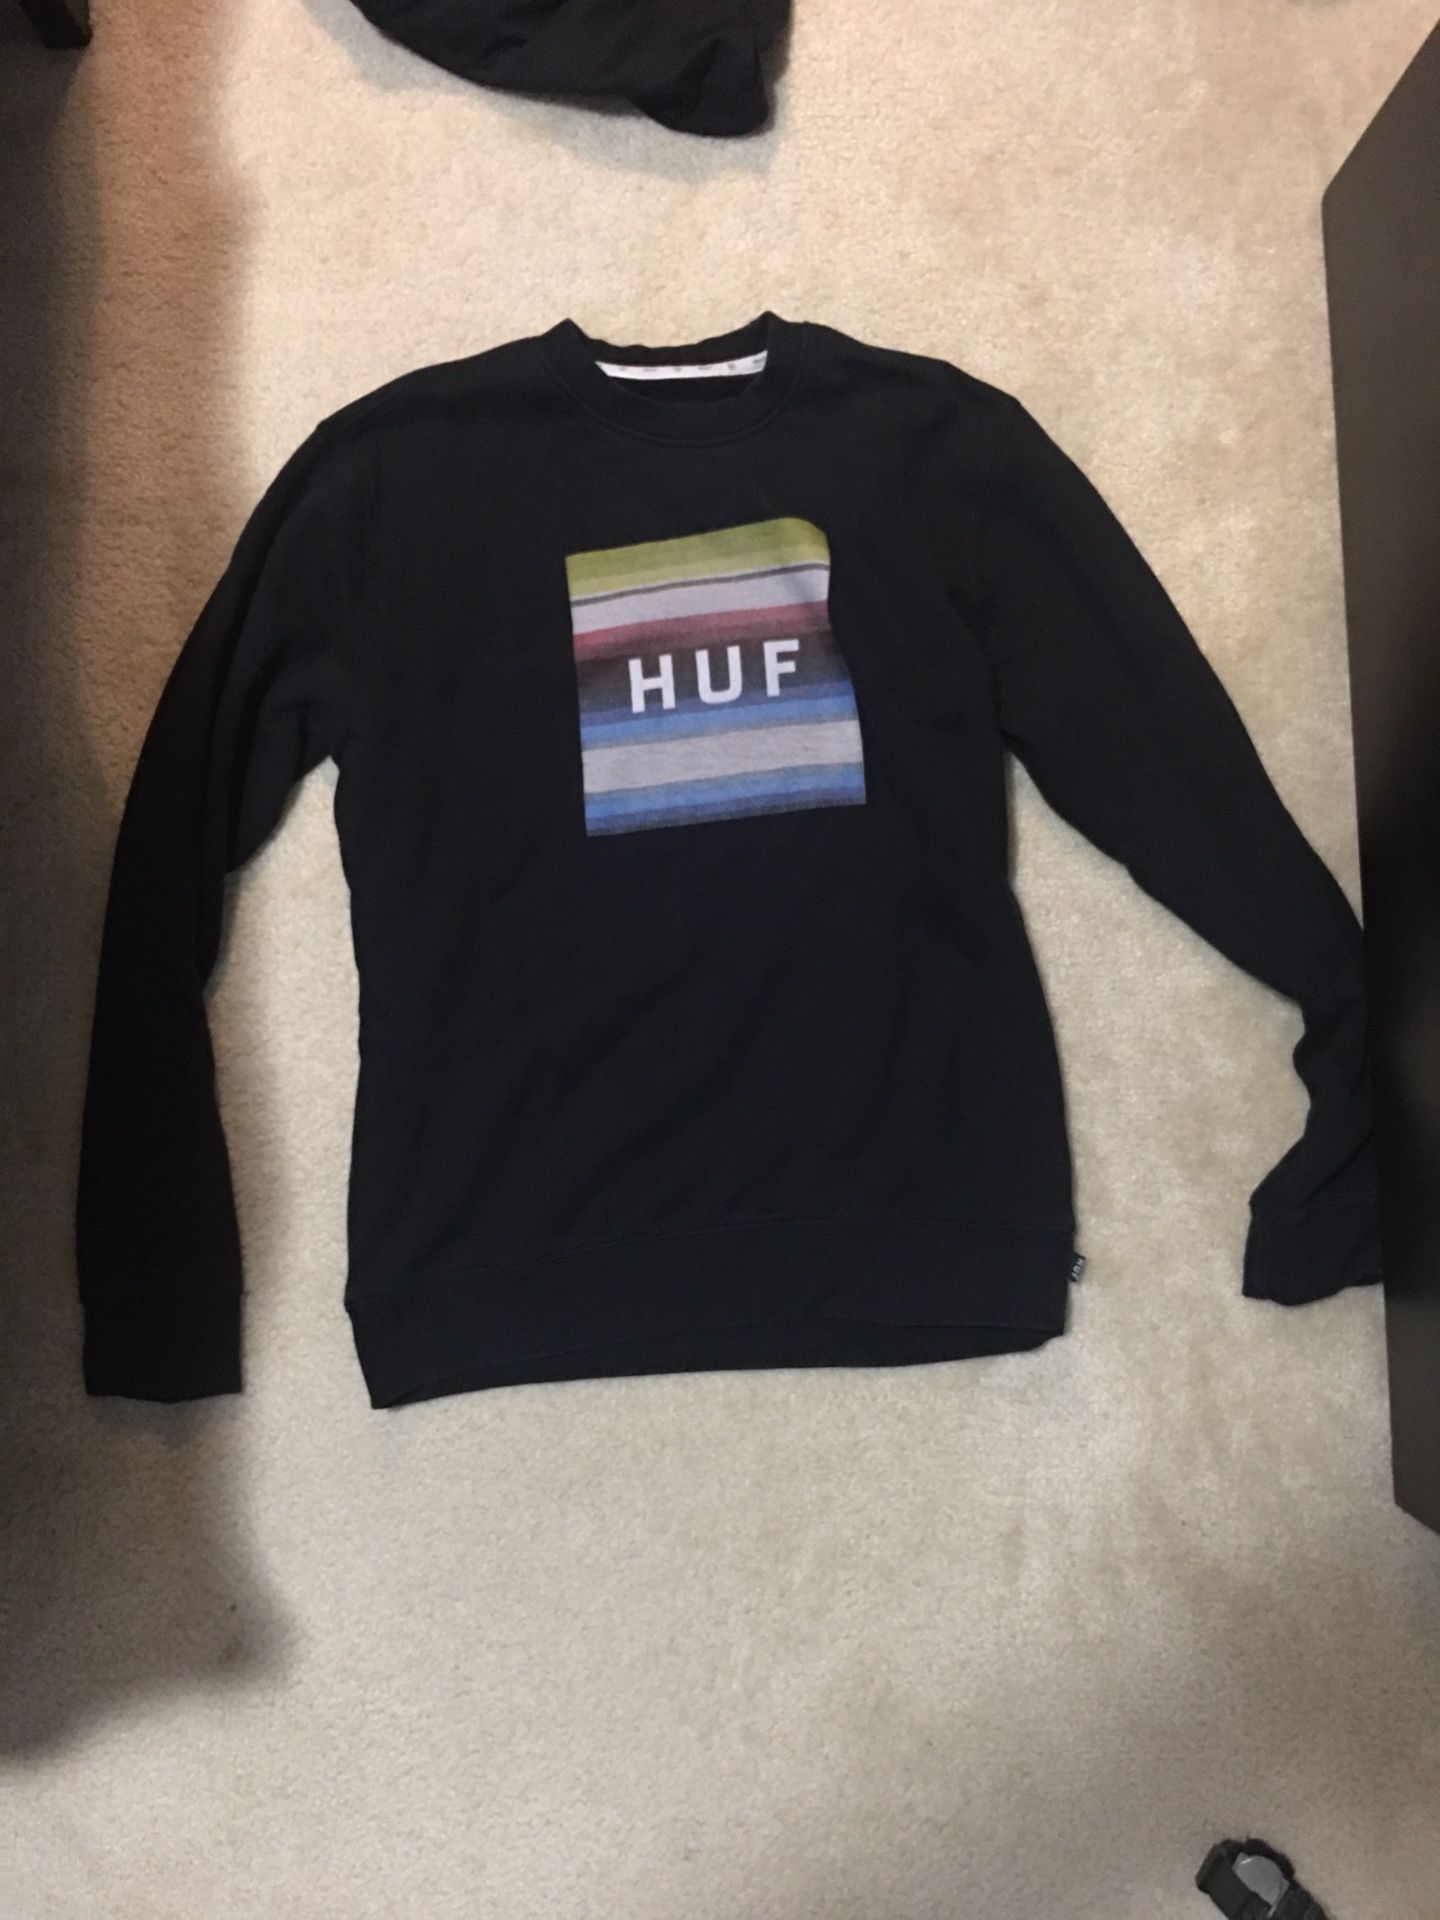 HUF SWEATER SIZE SMALL